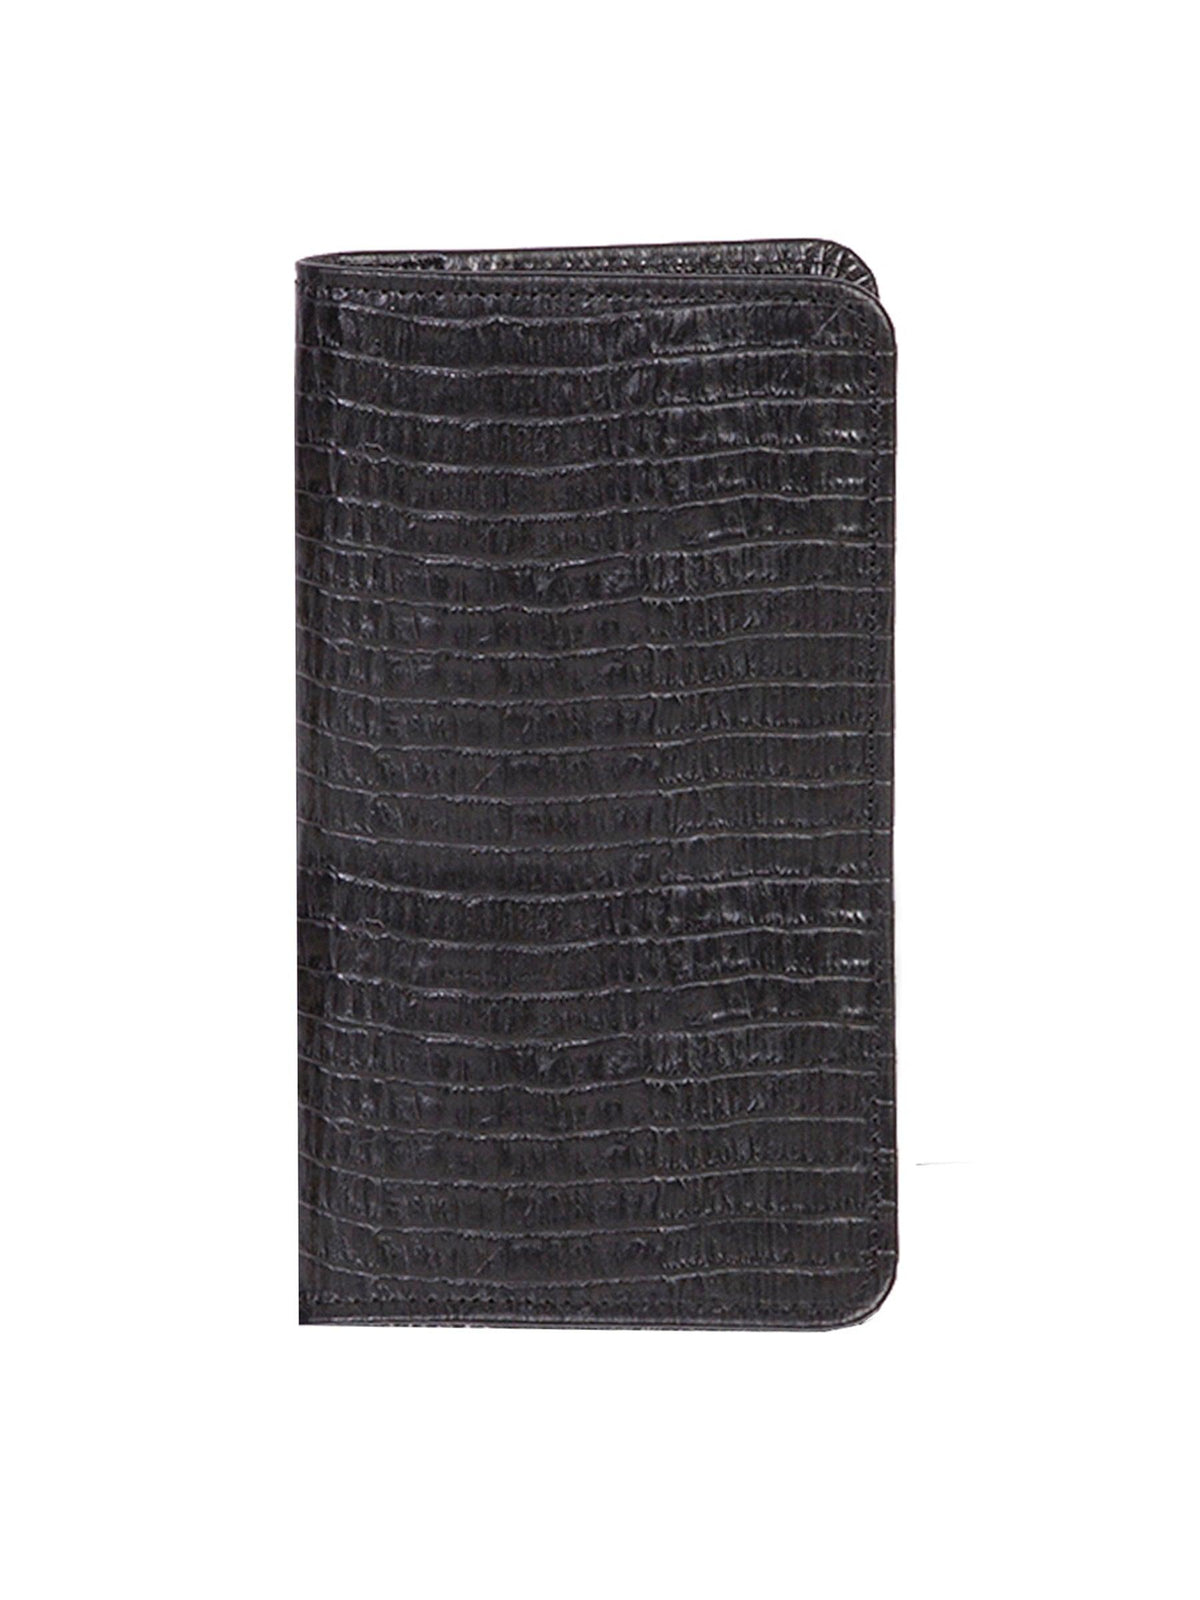 Scully Leather Black Lizard Leather Pocket Weekly Planner - Flyclothing LLC